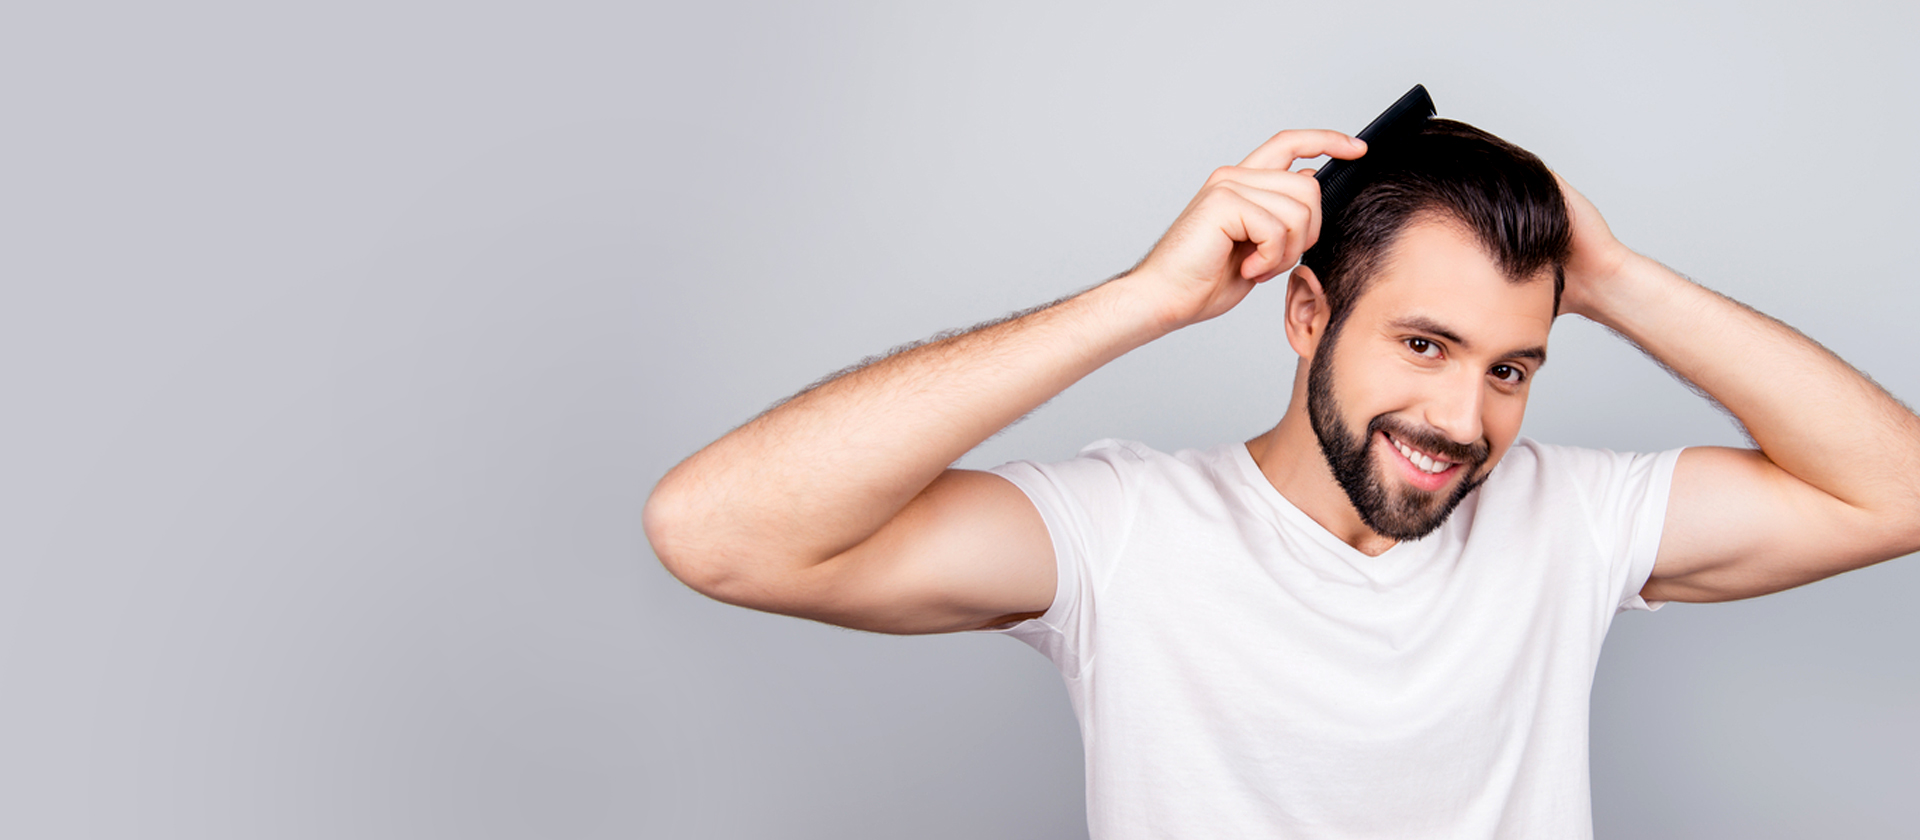  Which questions do people often raise while meeting the hair transplant surgeon?